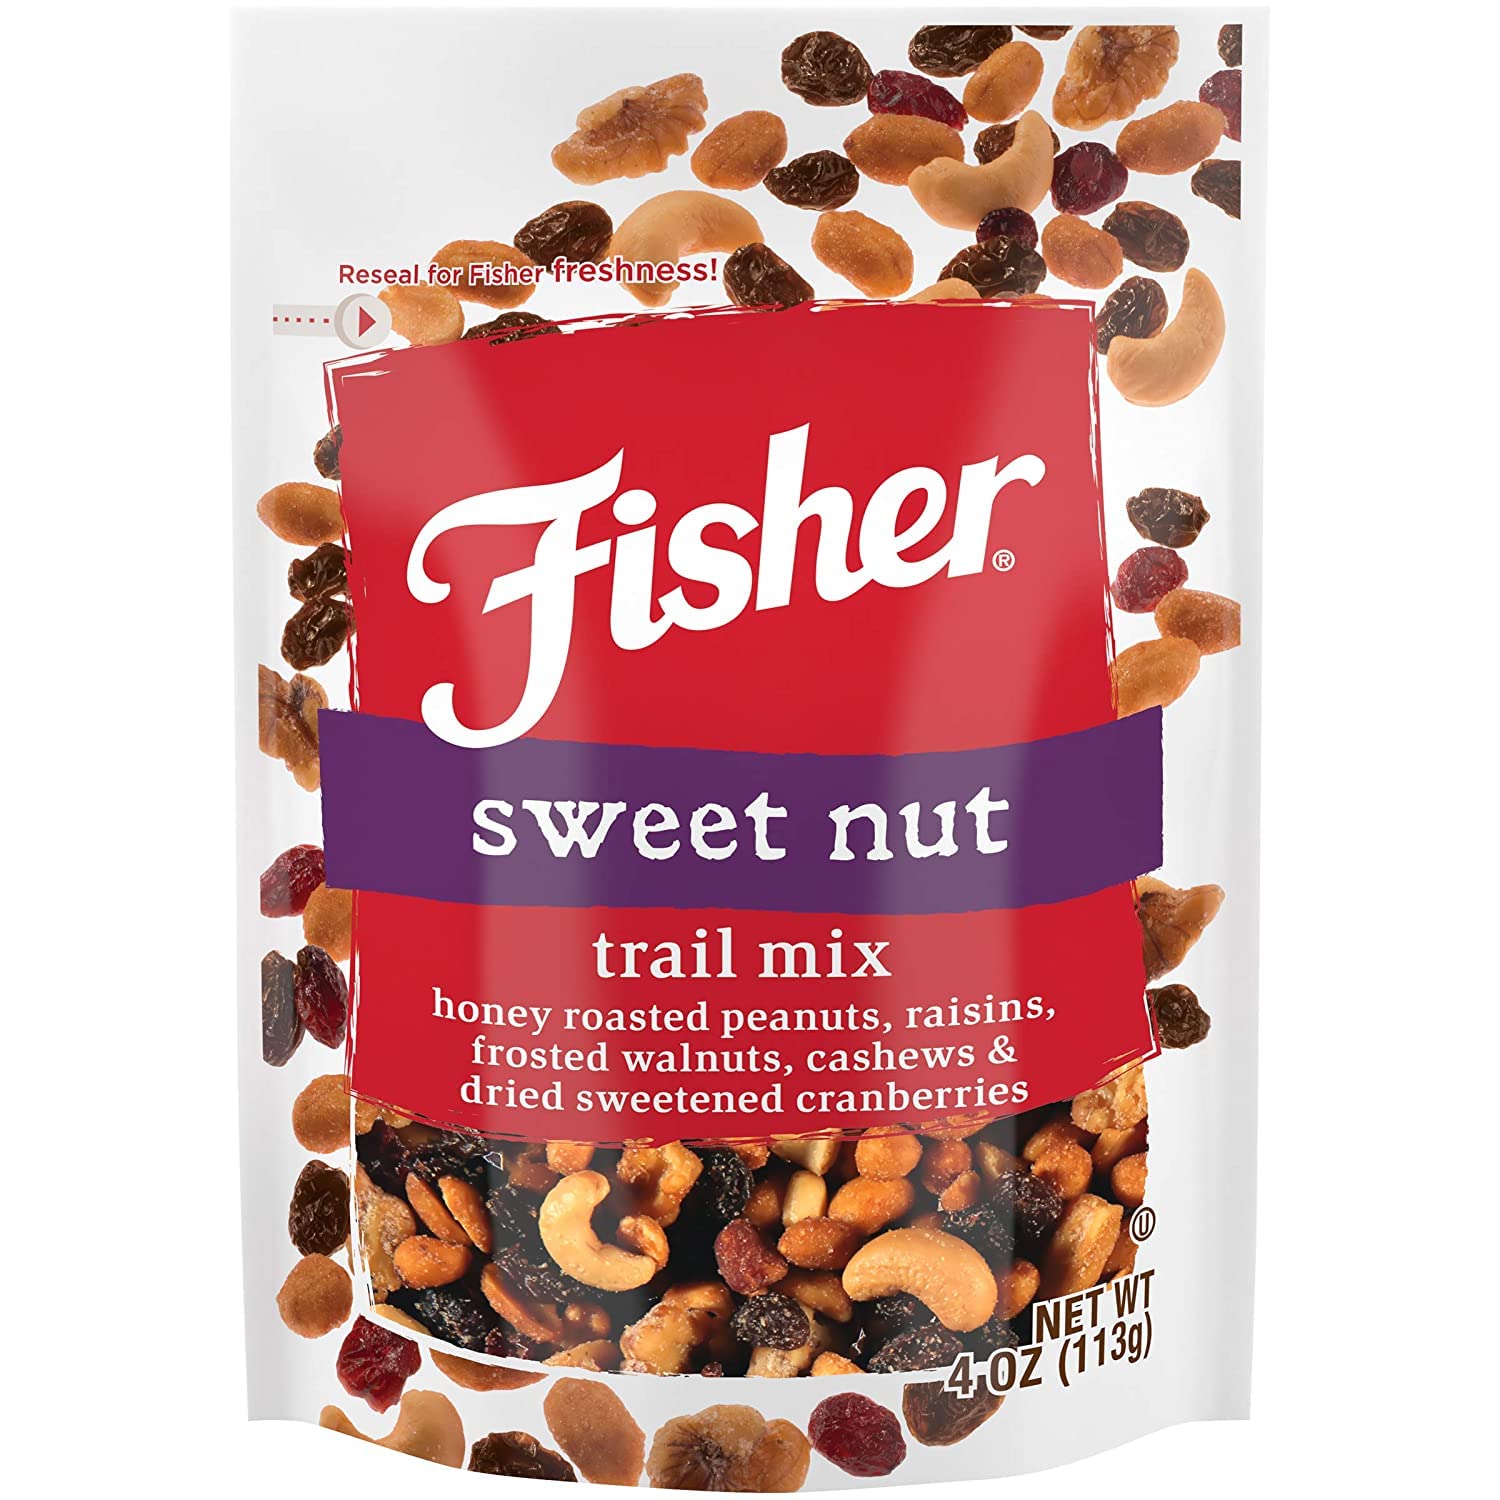 4-Oz Fisher Sweet Nut Trail Mix $1.60 w/ S&S + Free Shipping w/ Prime or on orders over $35